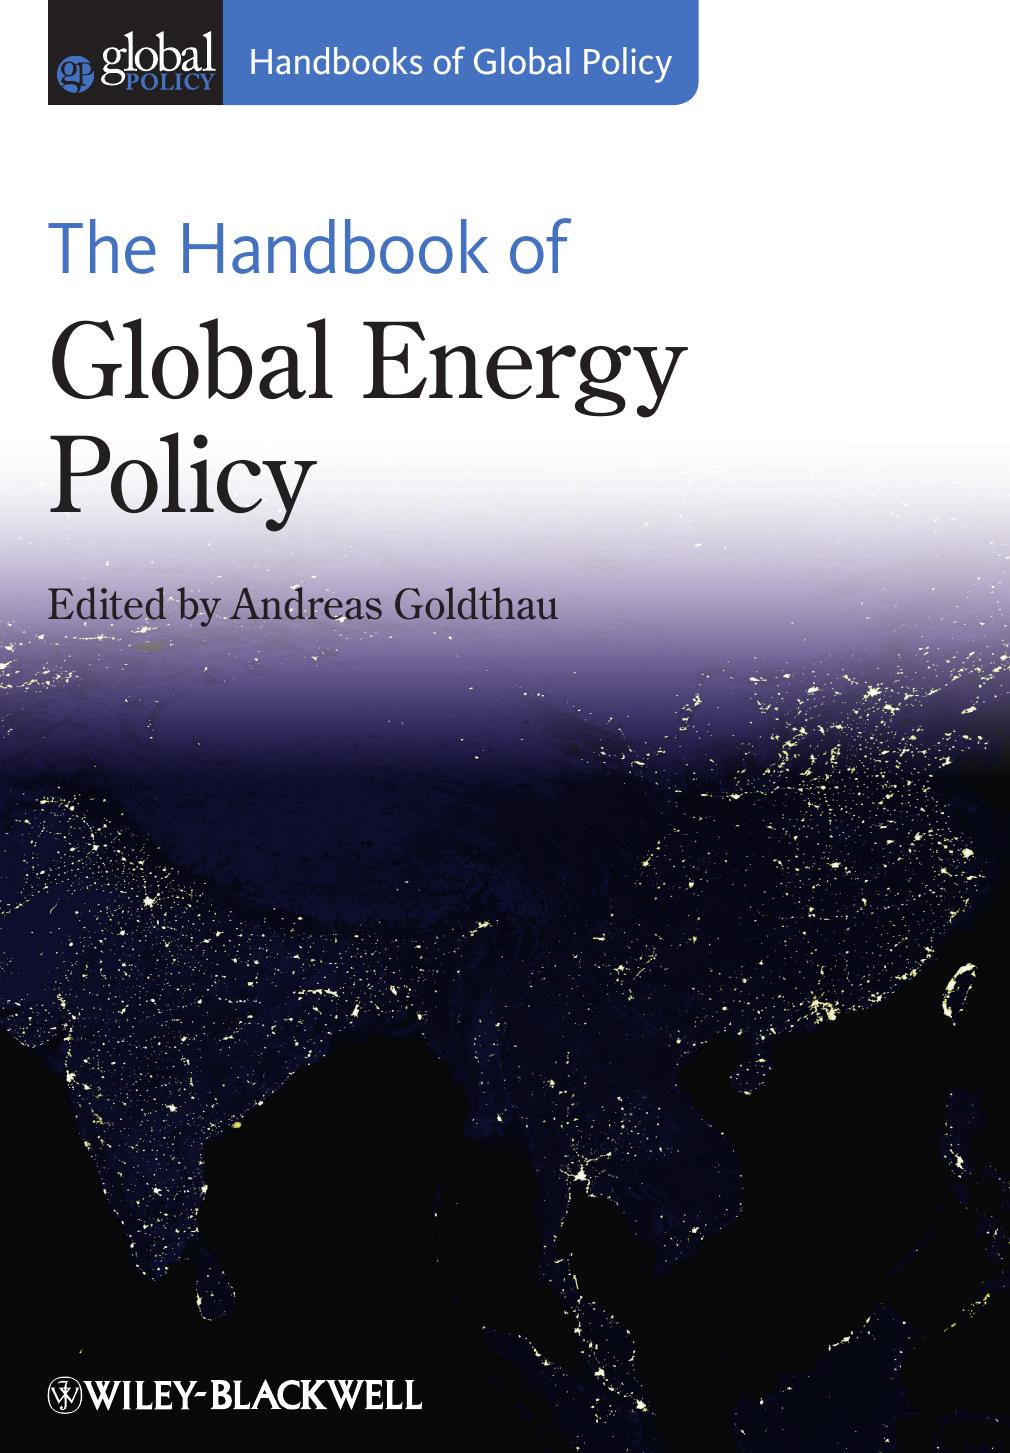 The Handbook of Global Energy Policy by Andreas Goldthau